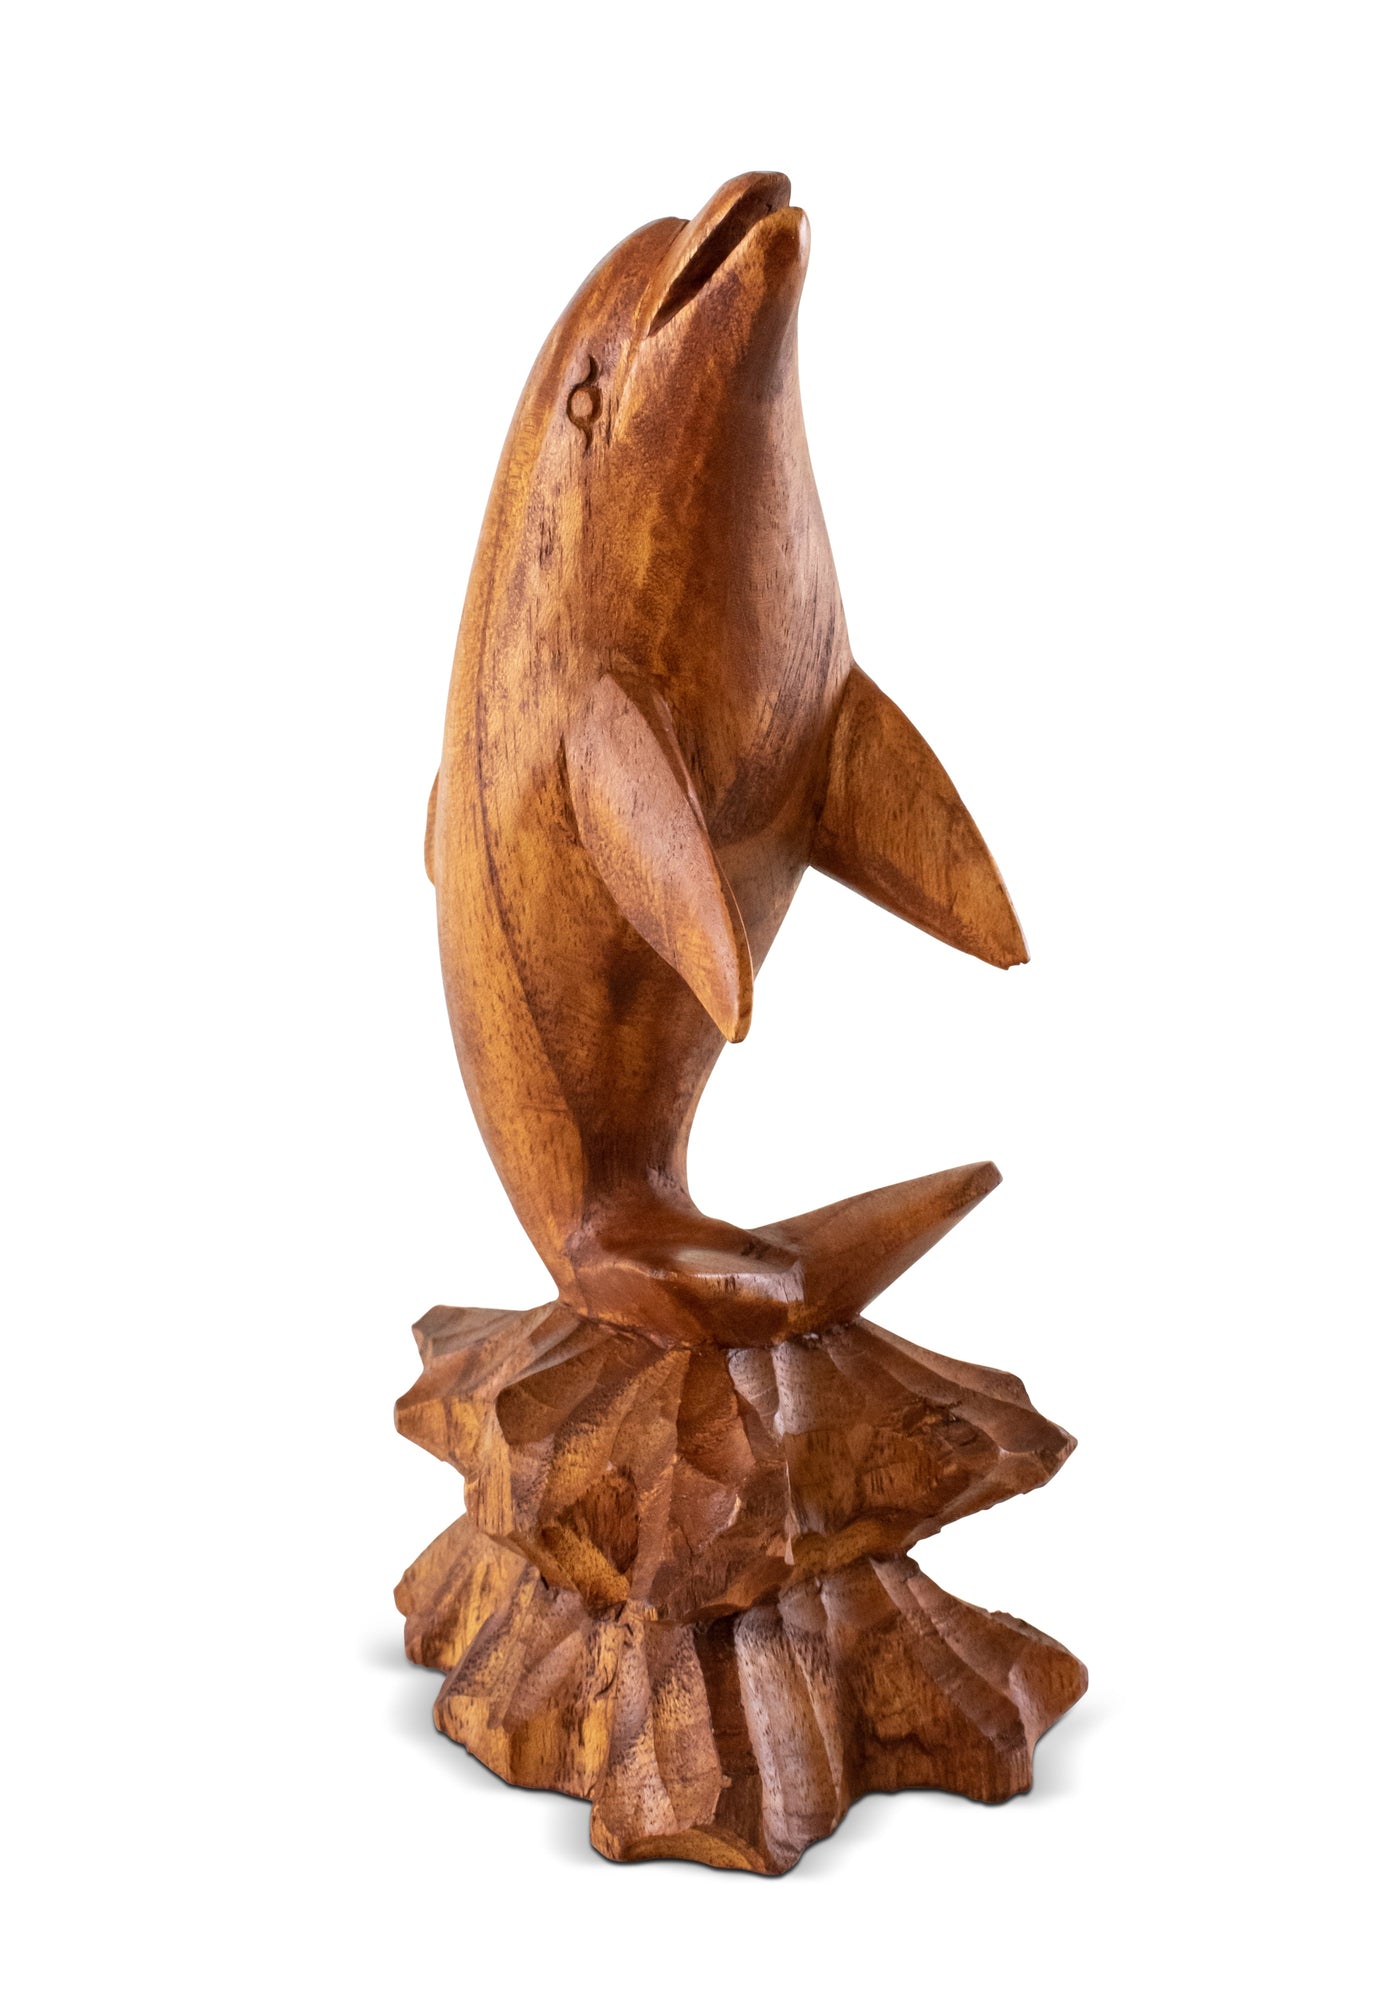 Wooden Hand Carved Dolphin on Coral Statue Sculpture Wood Decorative Decor Fish Figurine Handcrafted Handmade Seaside Tropical Nautical Ocean Coastal